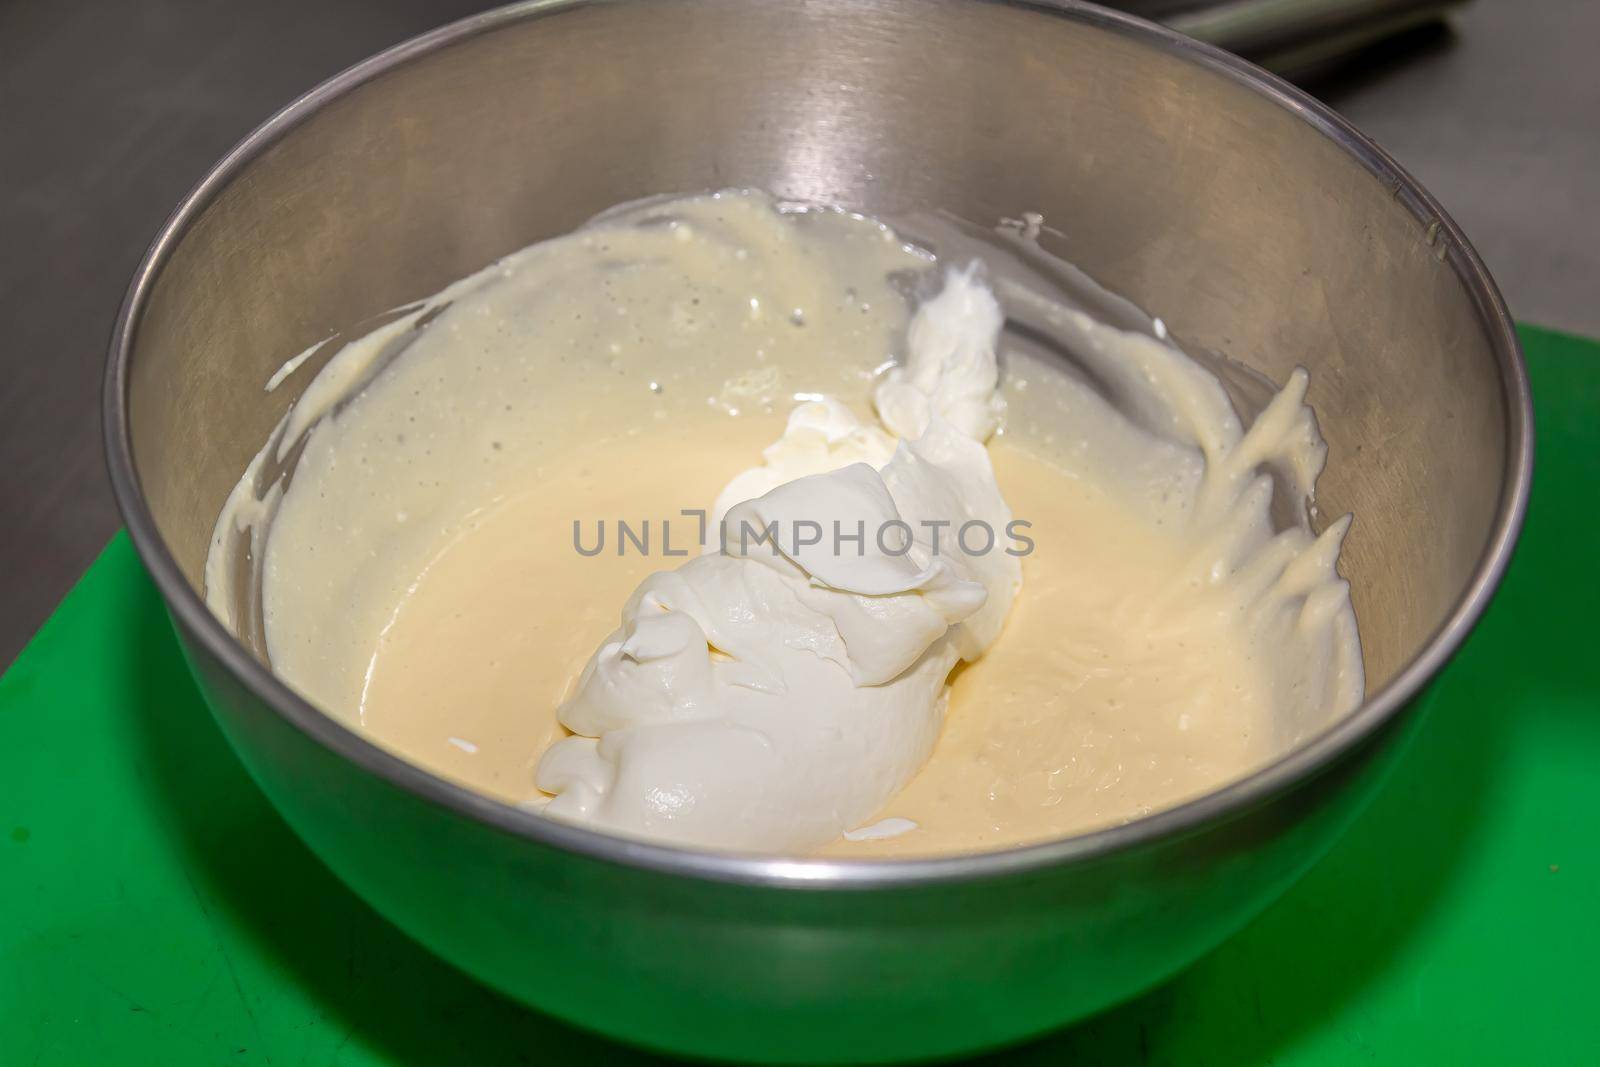 whisking egg yolks and sugar in a bowl.